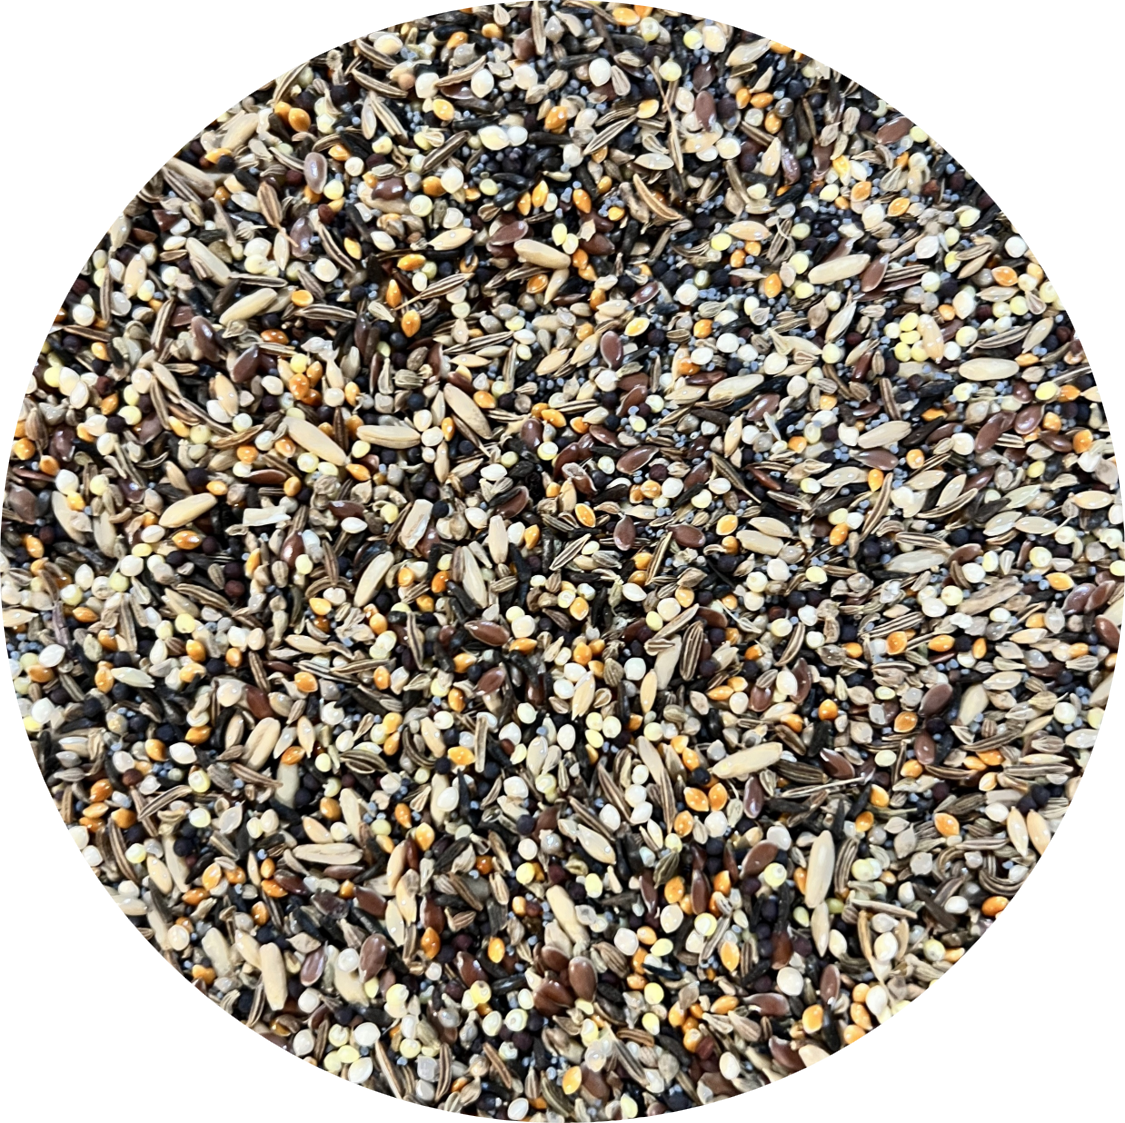 UN-Sprouted Seeds, Canary-Finch Mix